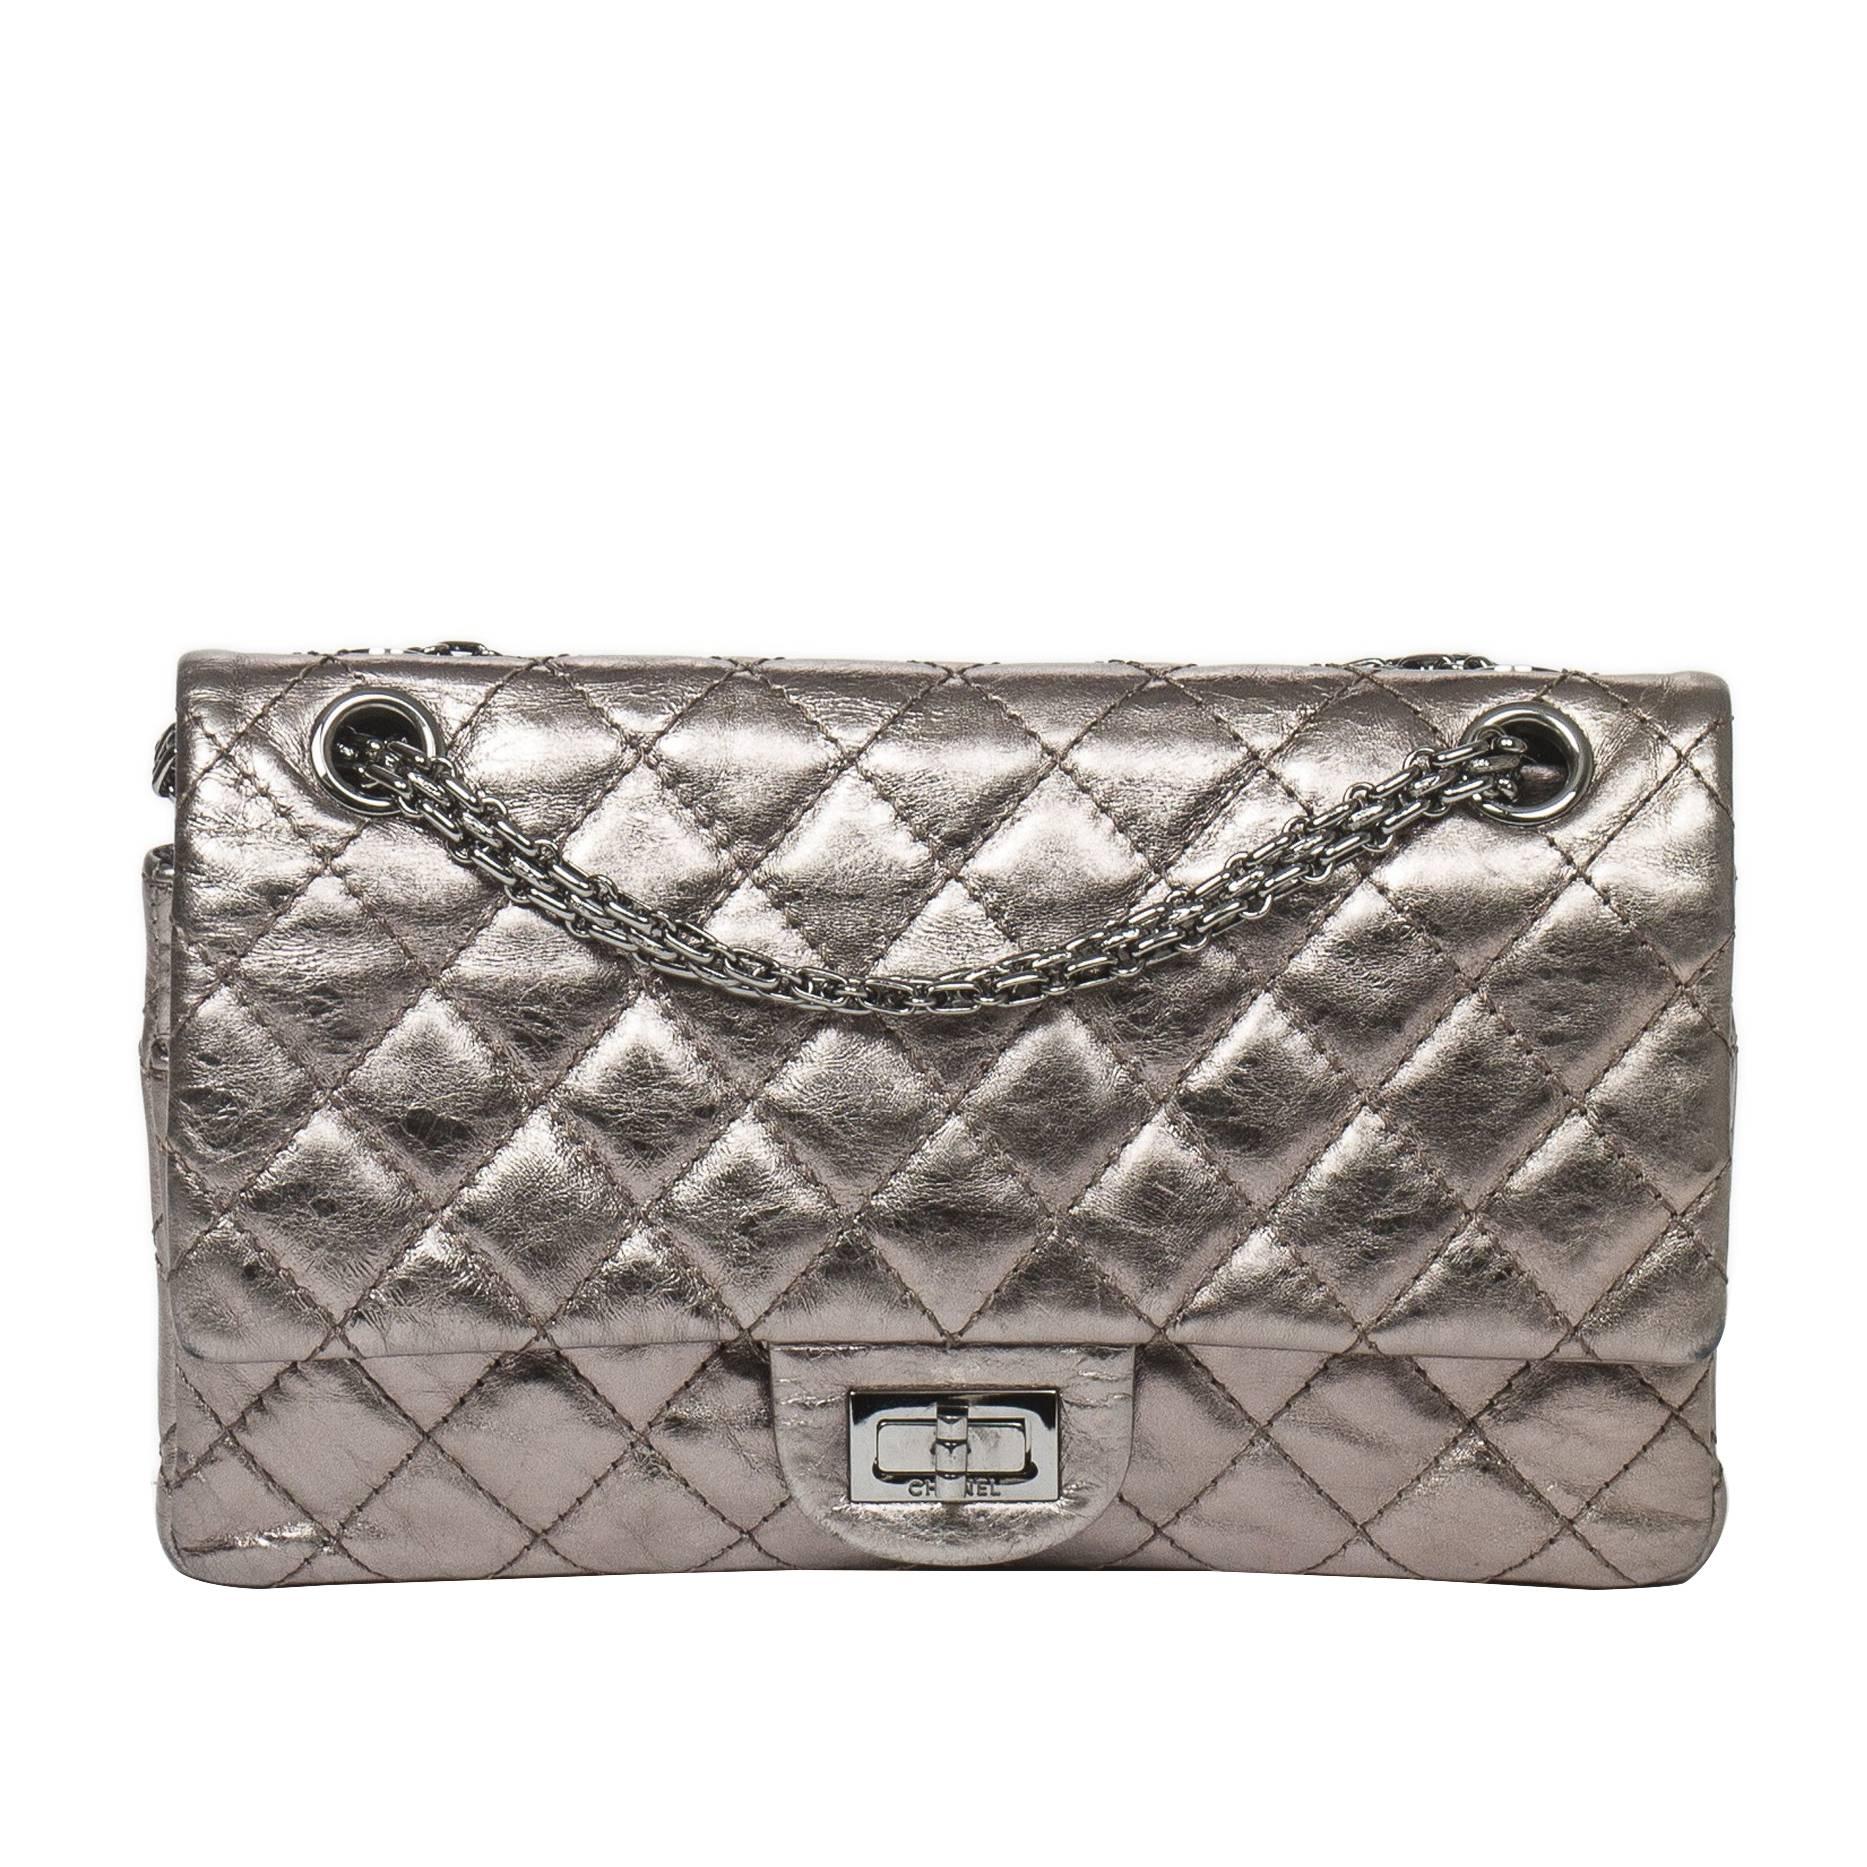 Chanel - Reissue Double Flap Metallic Silver Leather